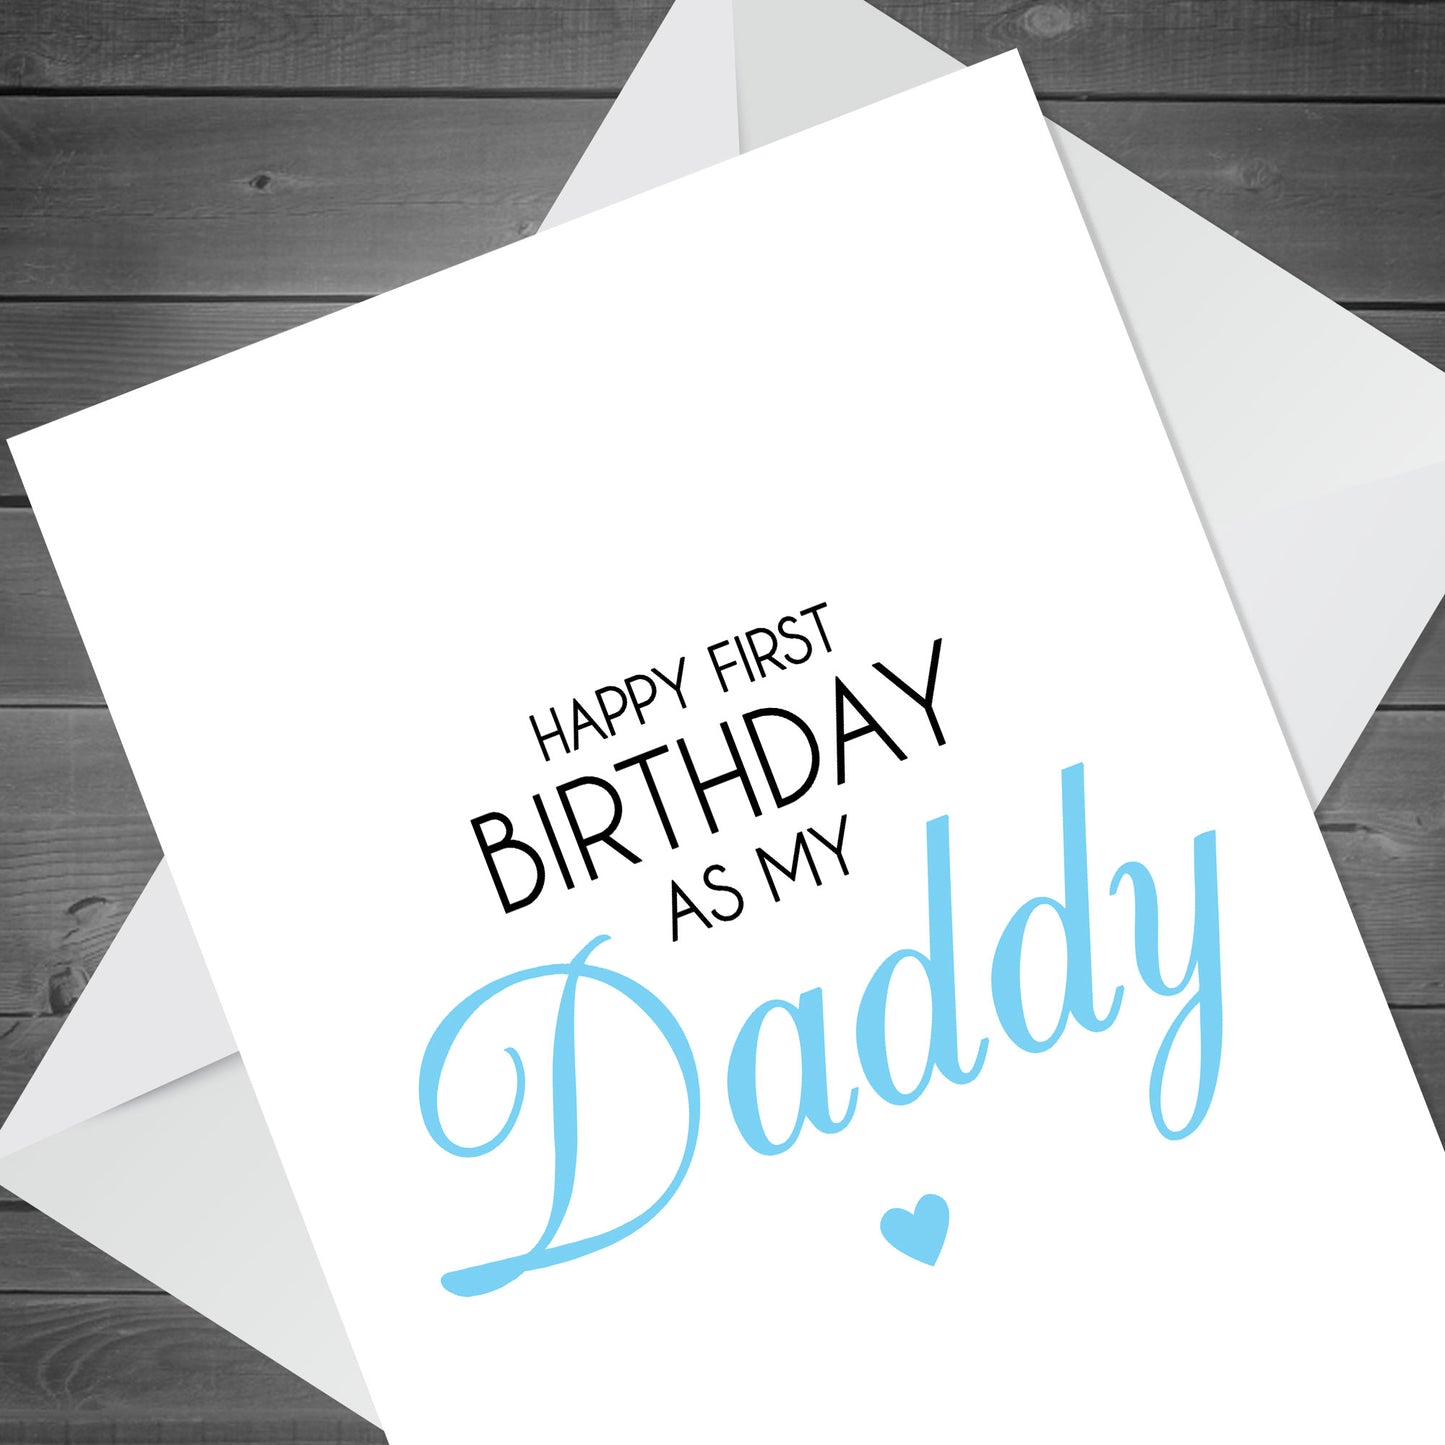 Red Ocean 1st Birthday Card For Daddy Greetings Card Daddy Card